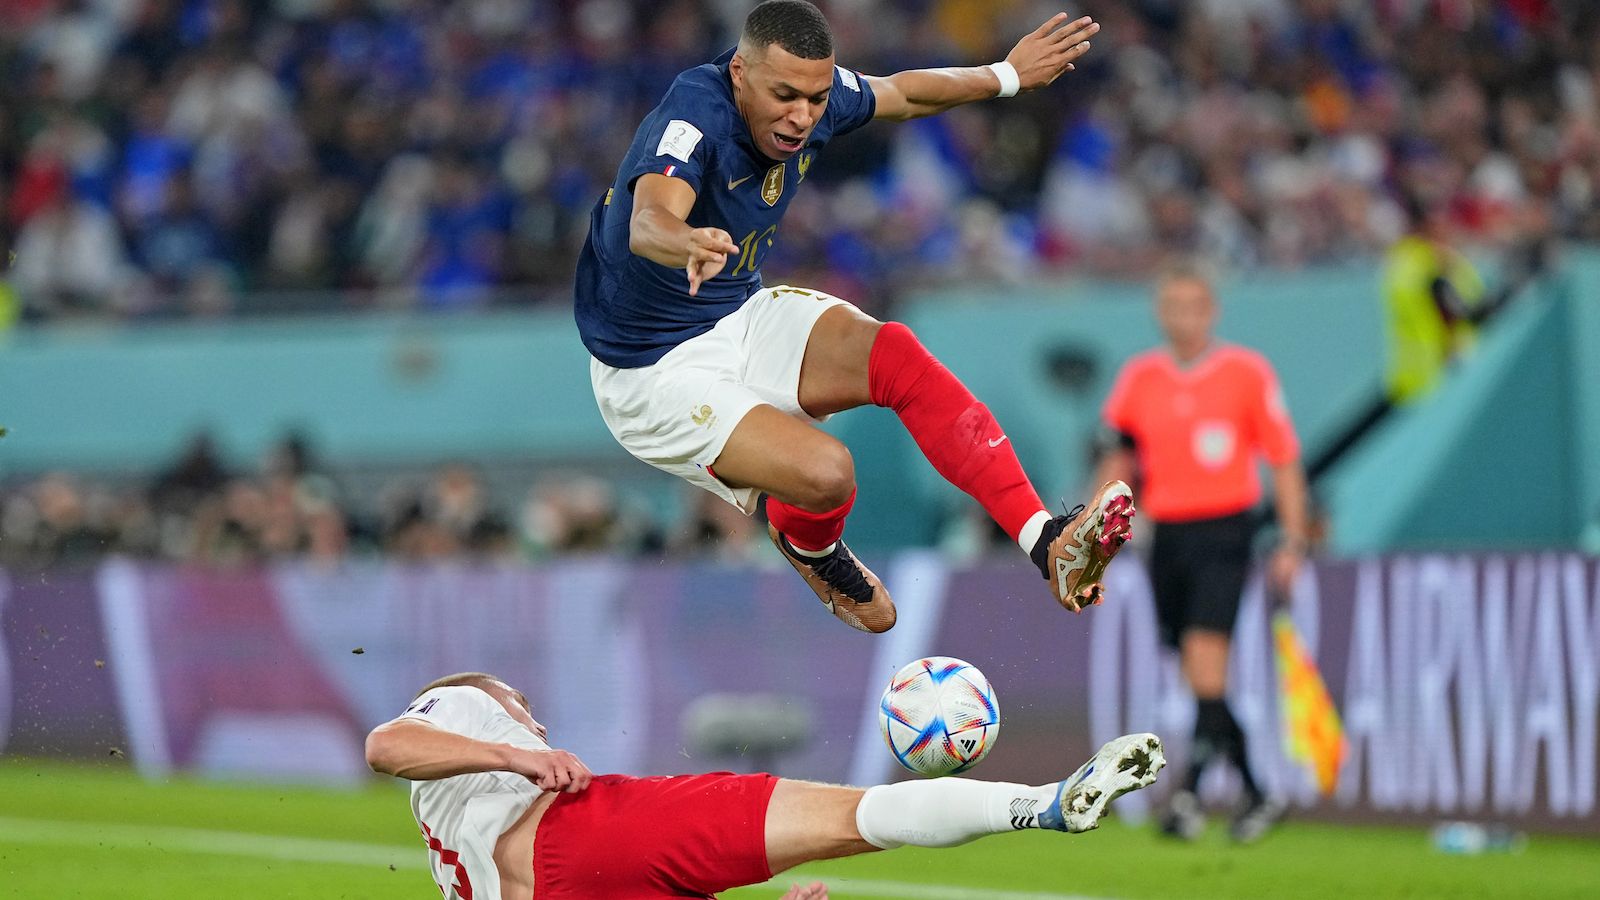 2022 World Cup Daily Watch Guide Dec. 4, France vs